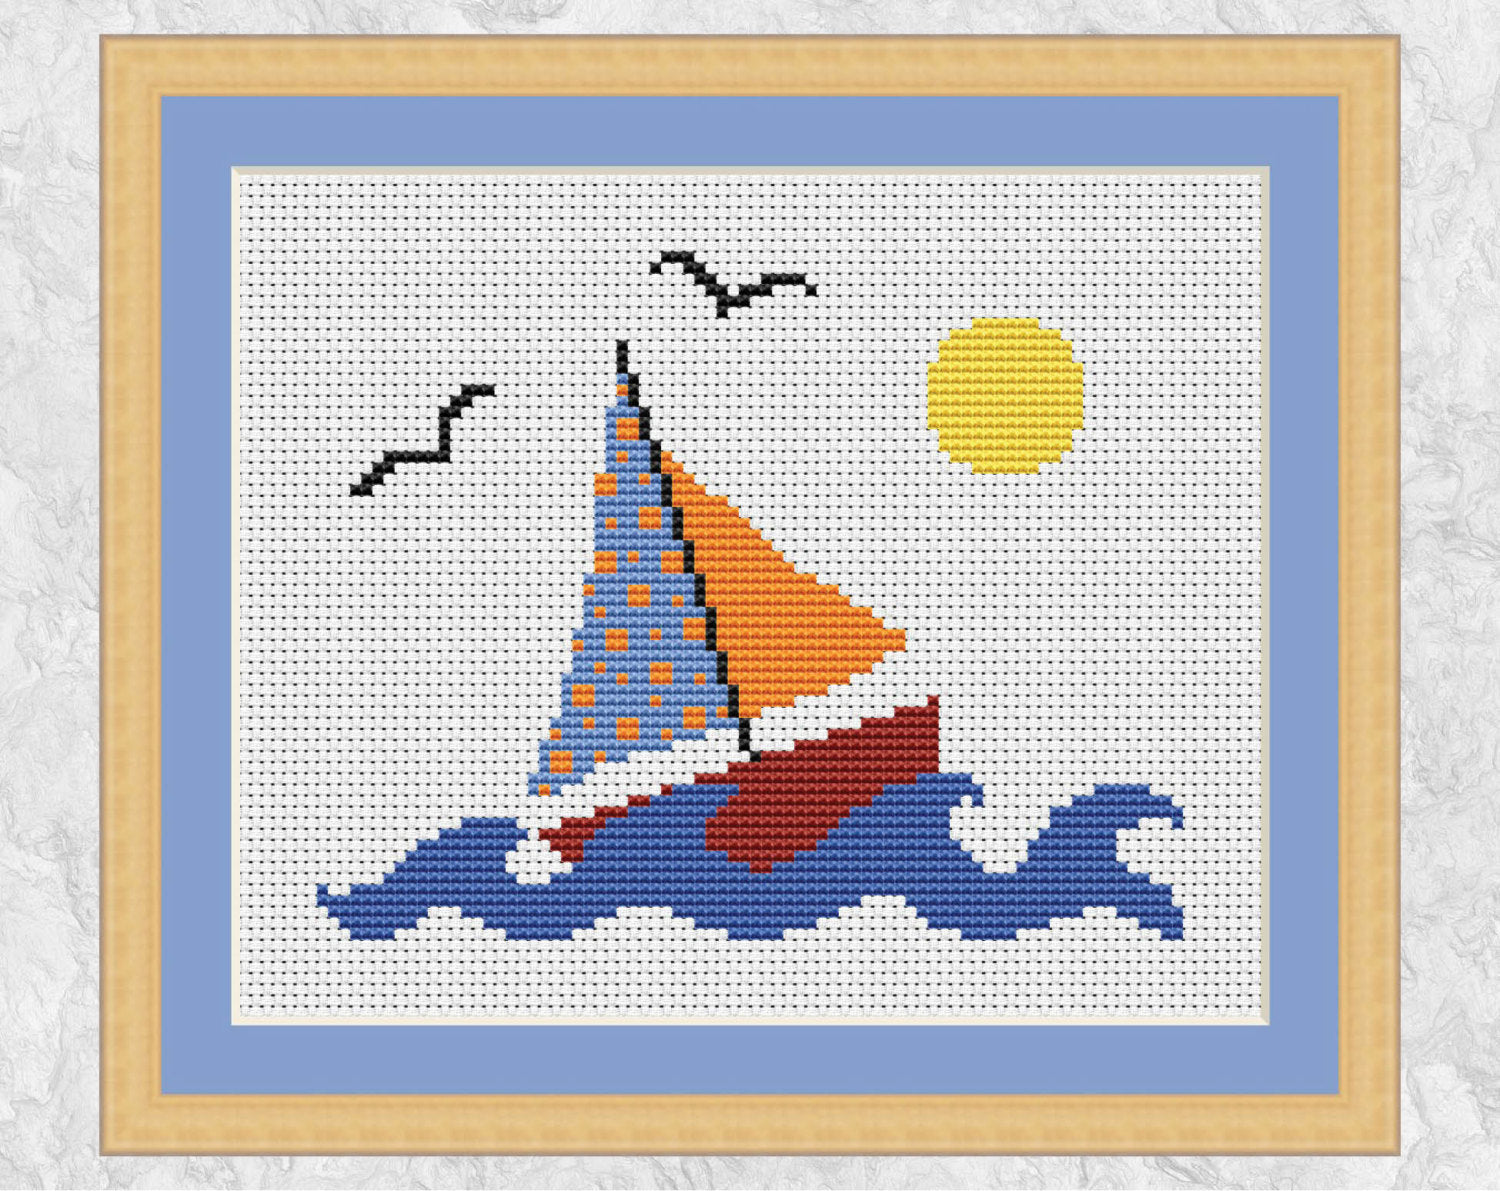 Cross stitch pattern of a sailboat out on the sea with waves, sun and birds. With frame.